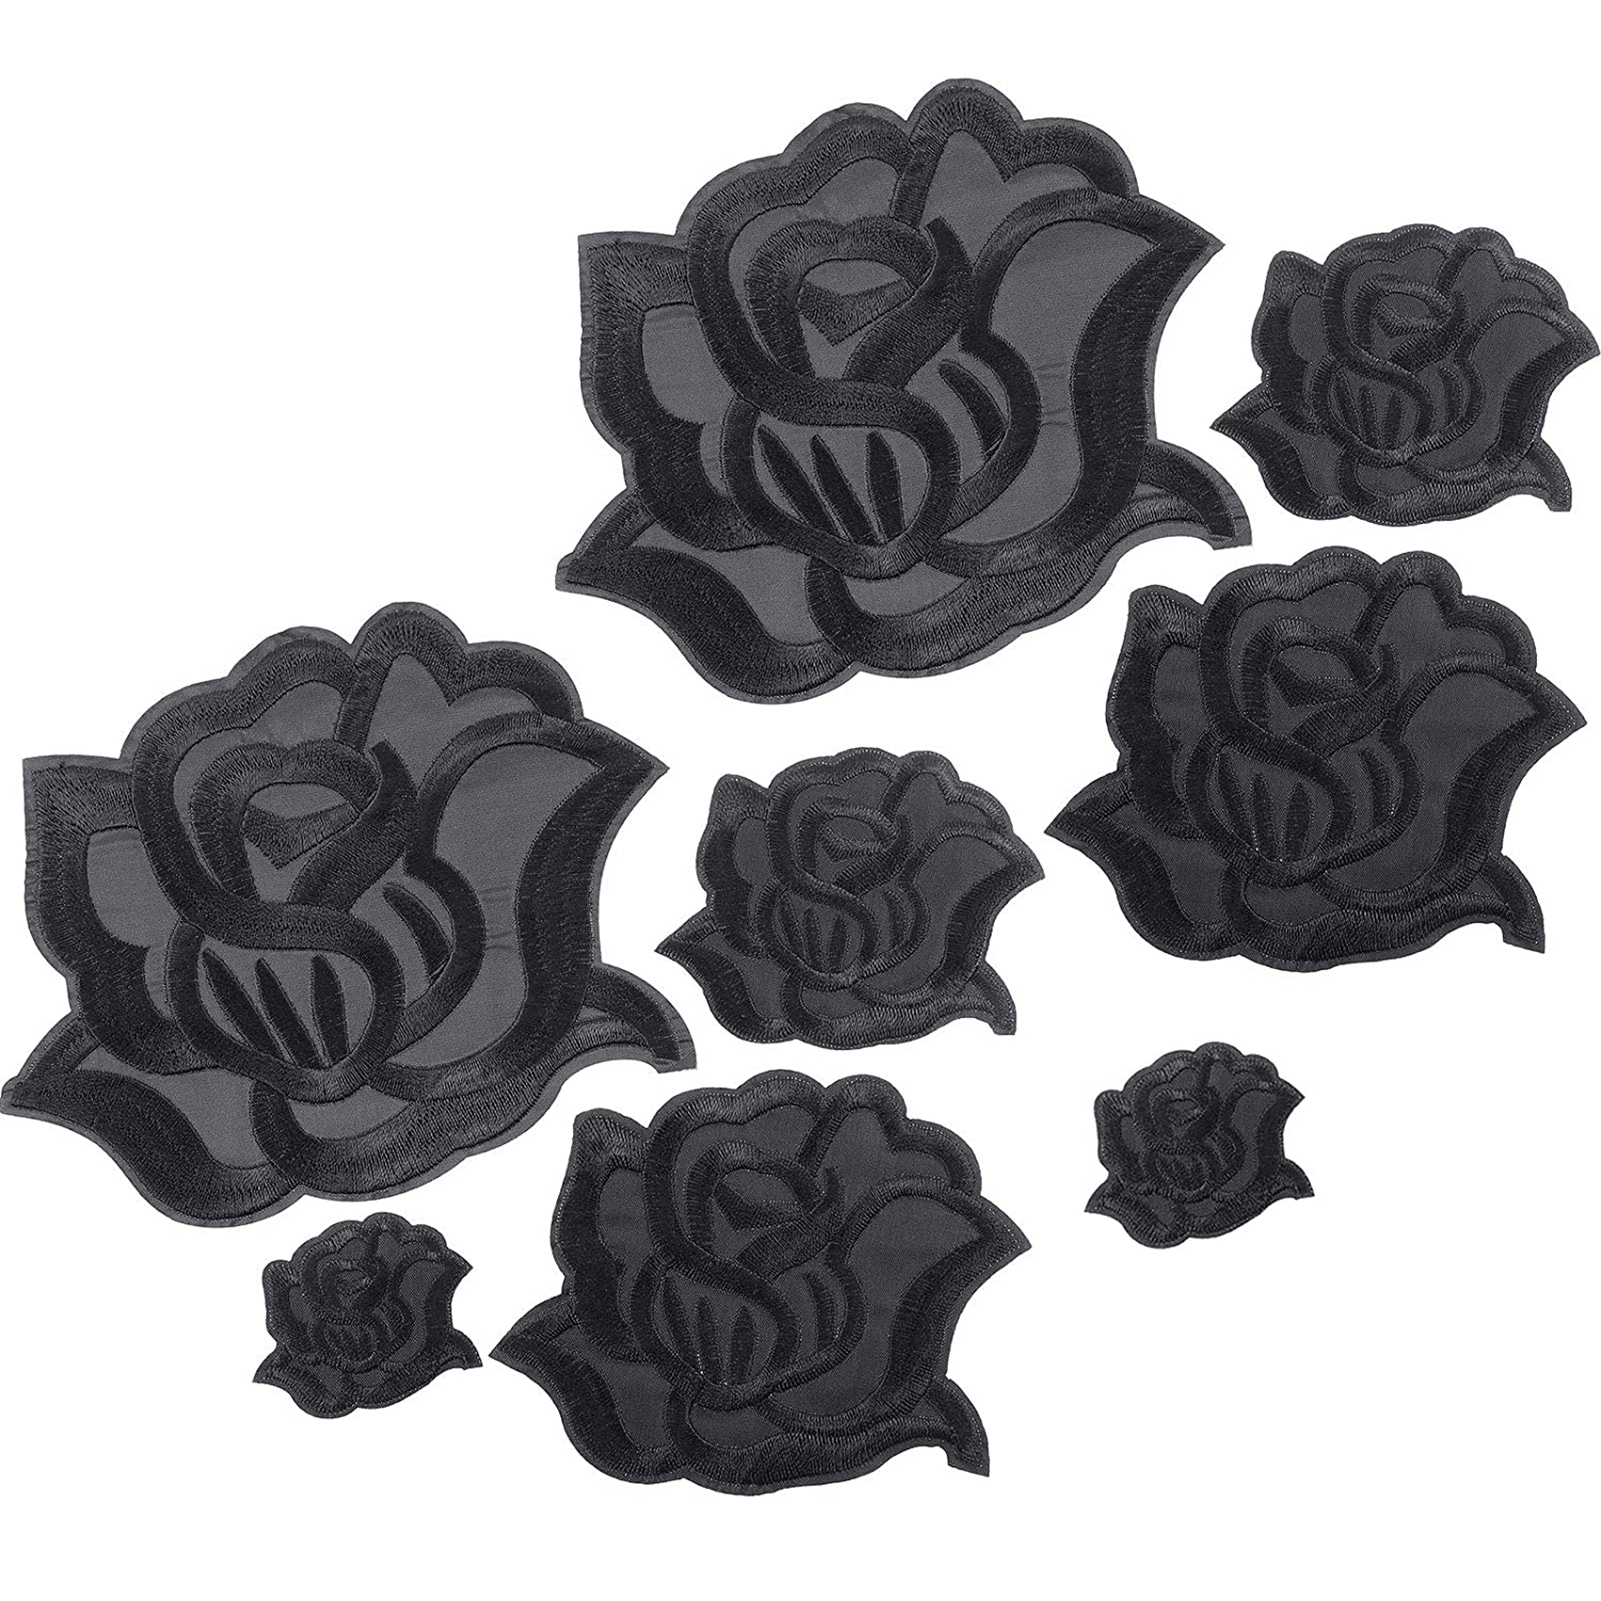 PWFE Black Rose Fabric Patches Rose Flower Repair Patches 4 Size